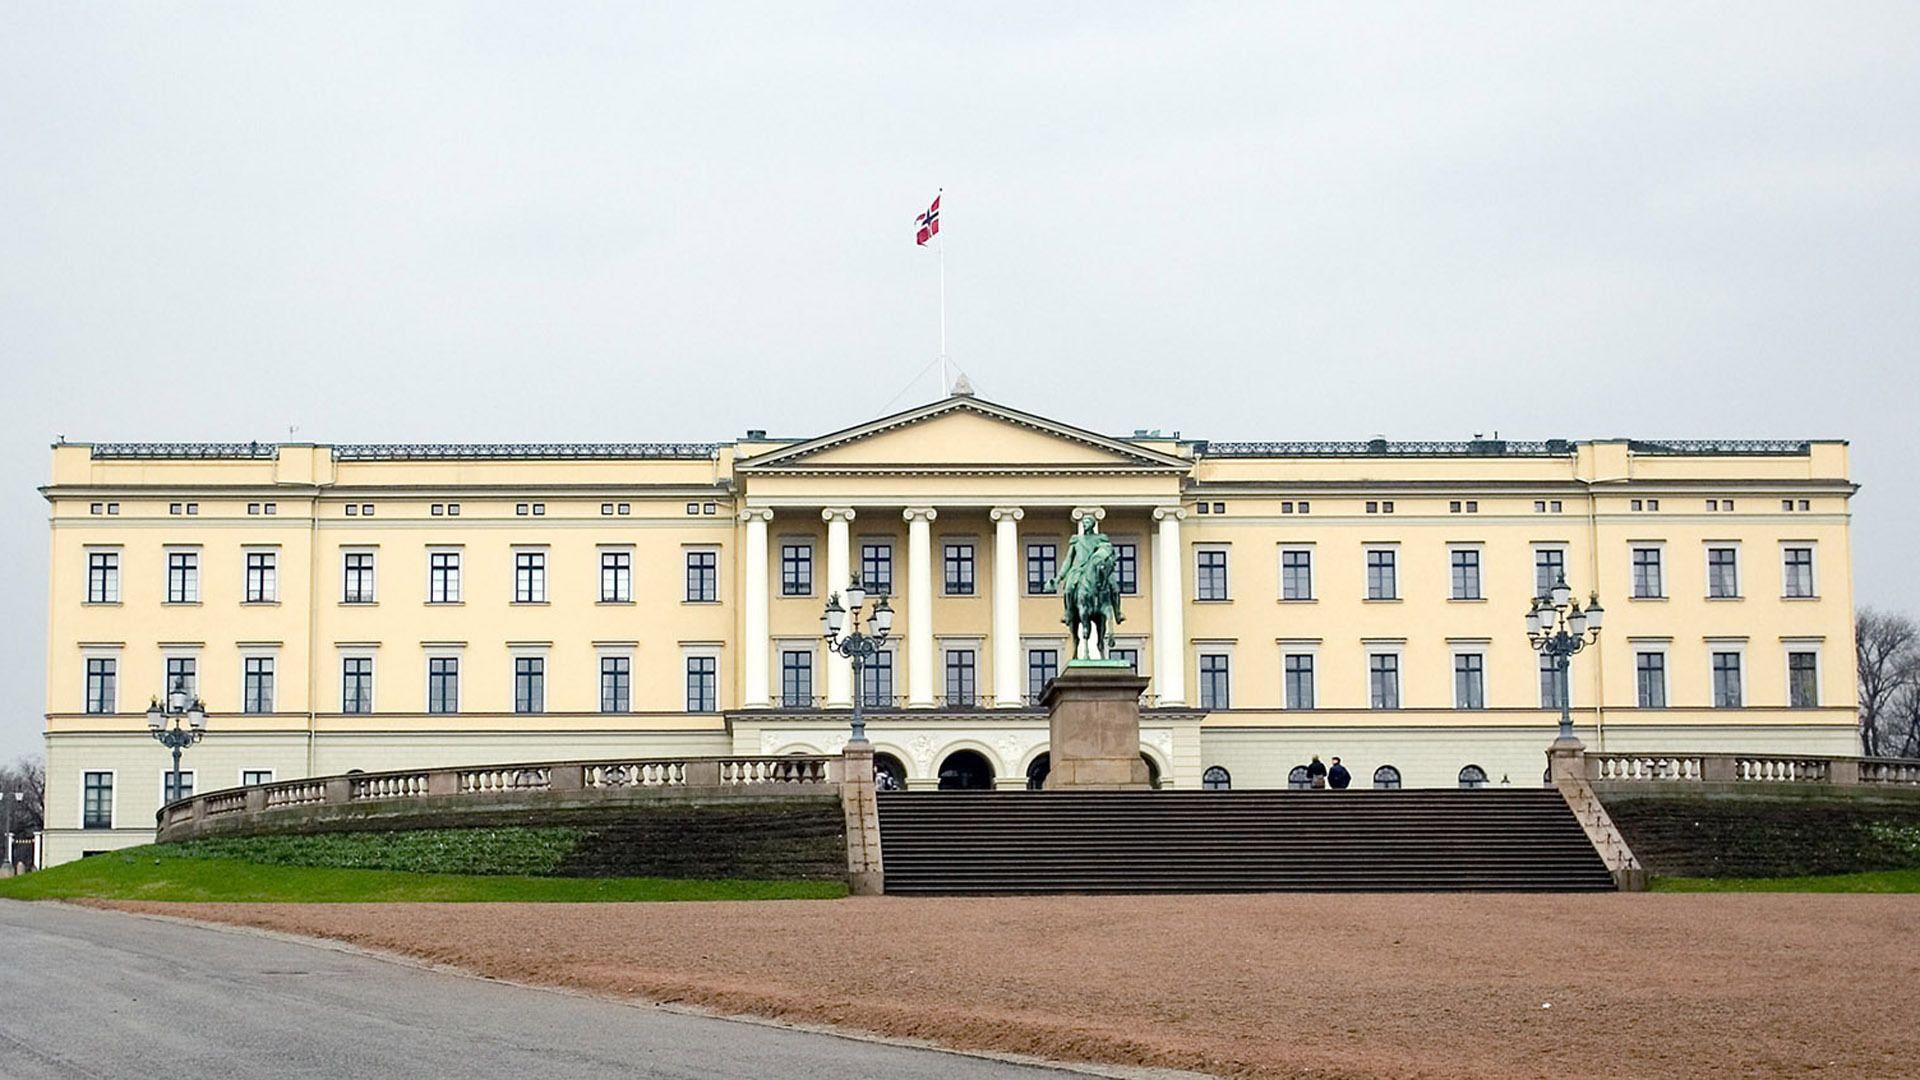 The Royal Palace in Oslo wallpaper and image